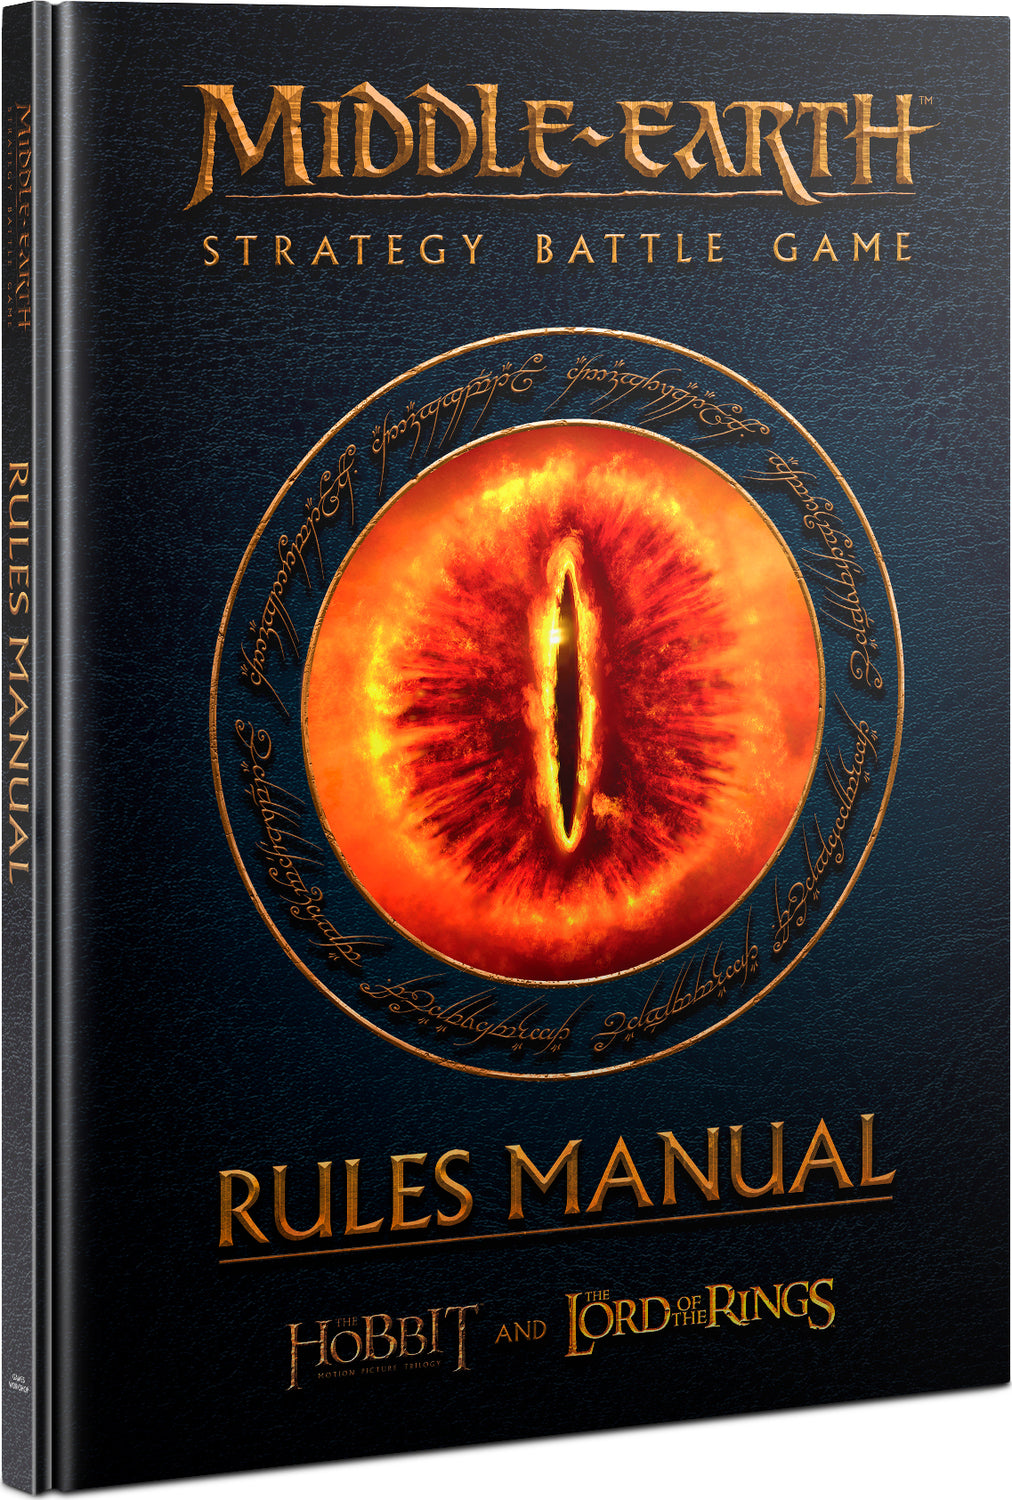 Middle-Earth Sbg:RULES MANUAL